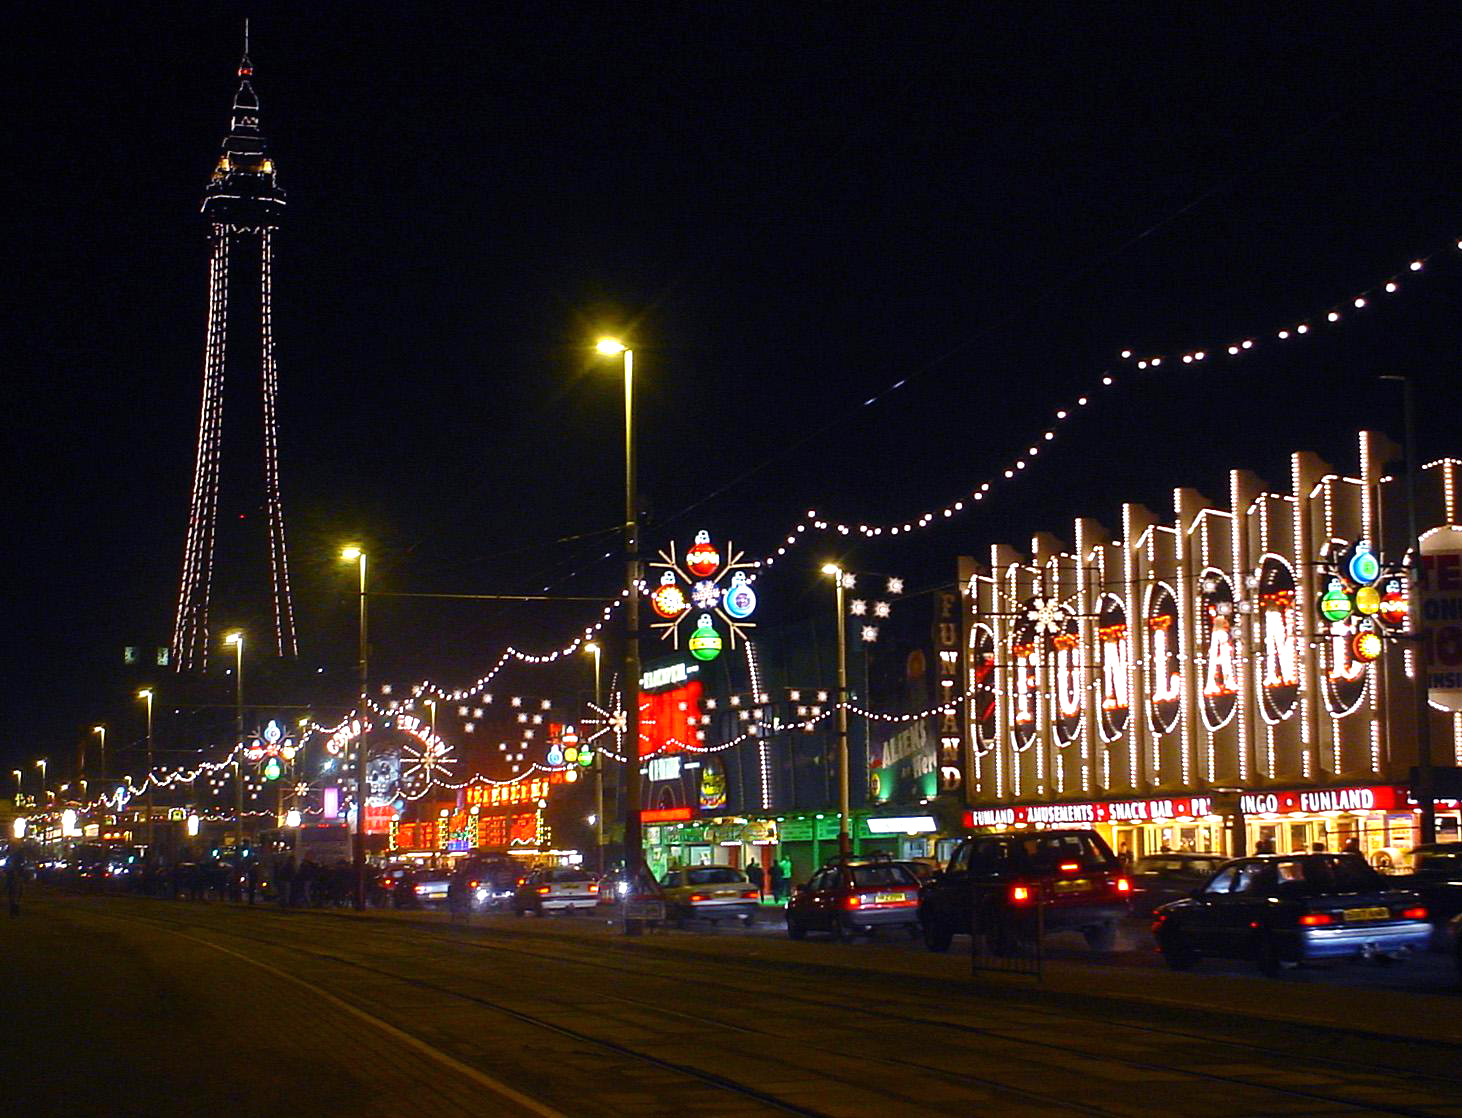 Blackpool Illuminations are being extended to the end of the year, The Manc